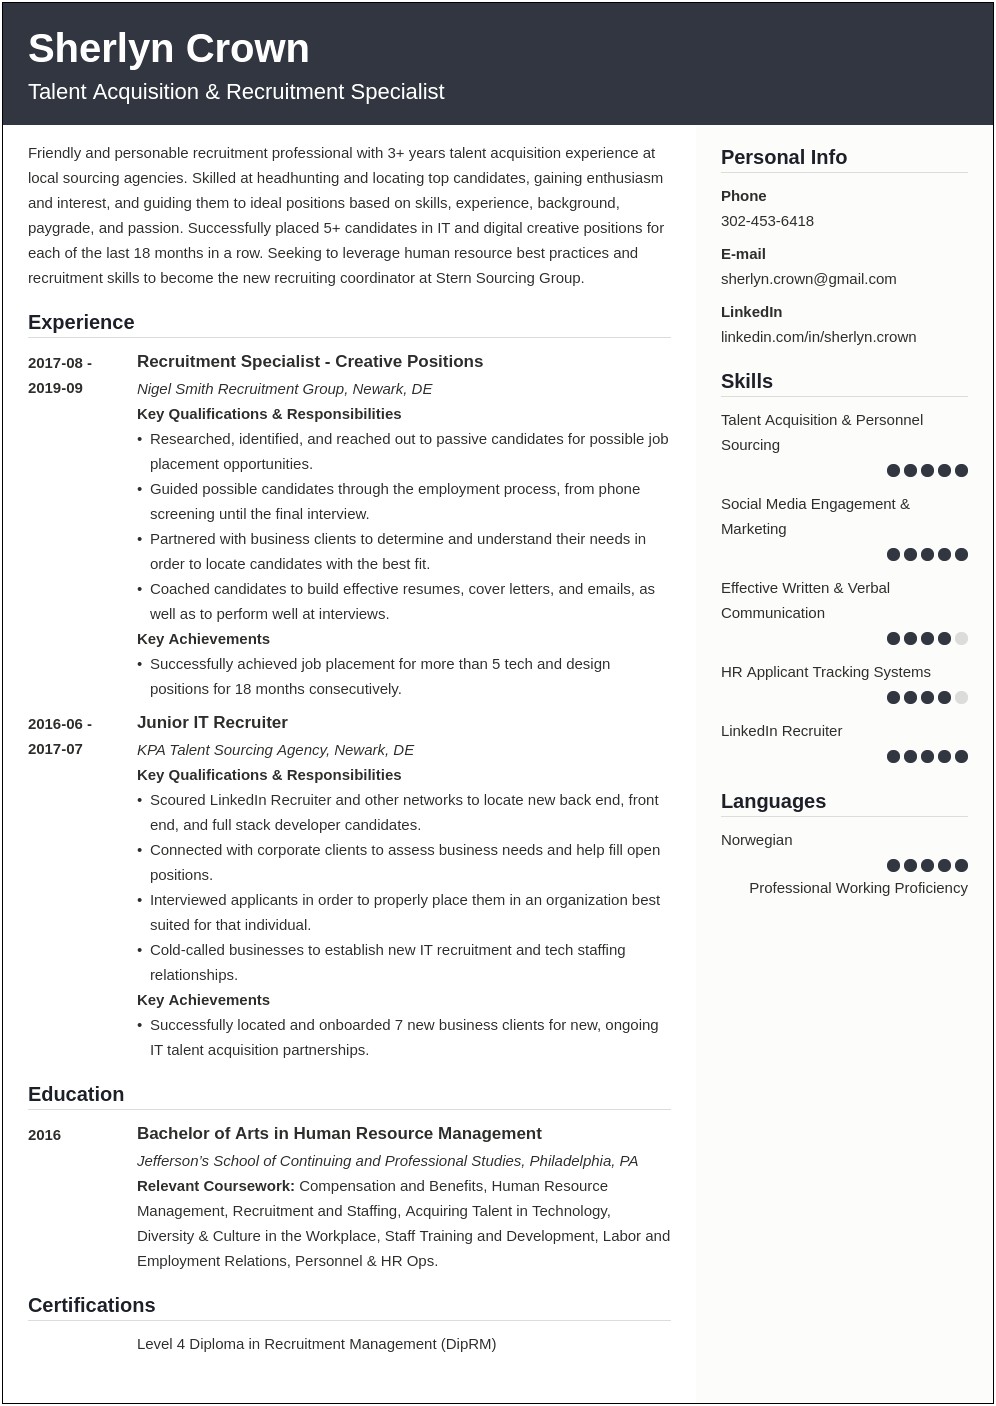 Best Resume To Find A Recruiting Job